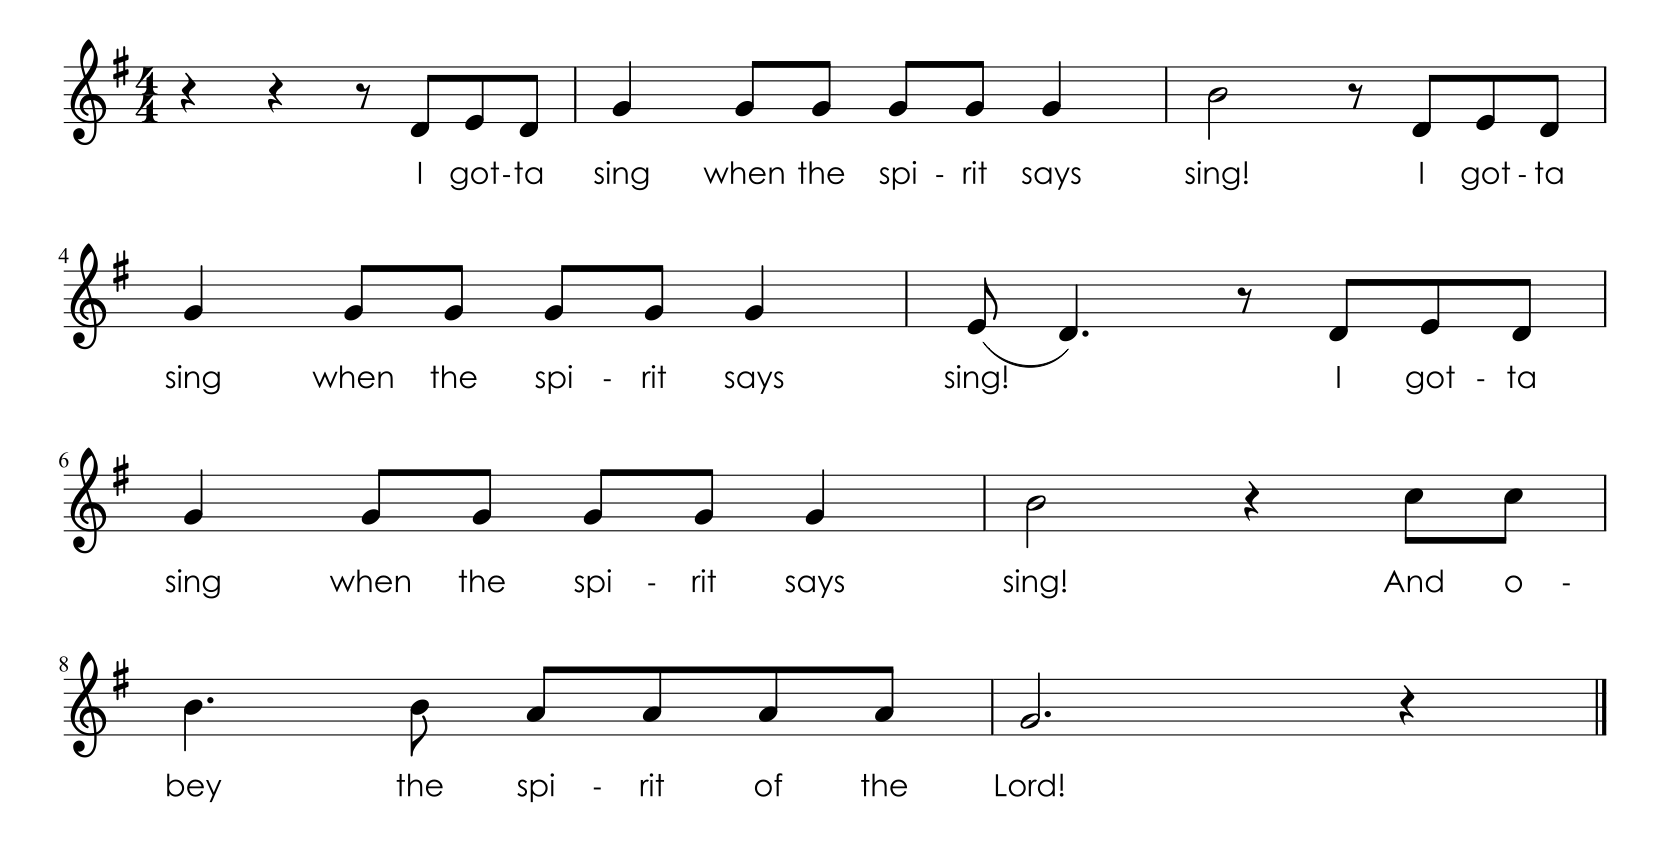 Singing a song перевод. Ноты Sing, Sing a Song. Notes Mary had a little. I'M gonna Sing when the Spirit says Sing Ноты. Simple Song Notes for singing.